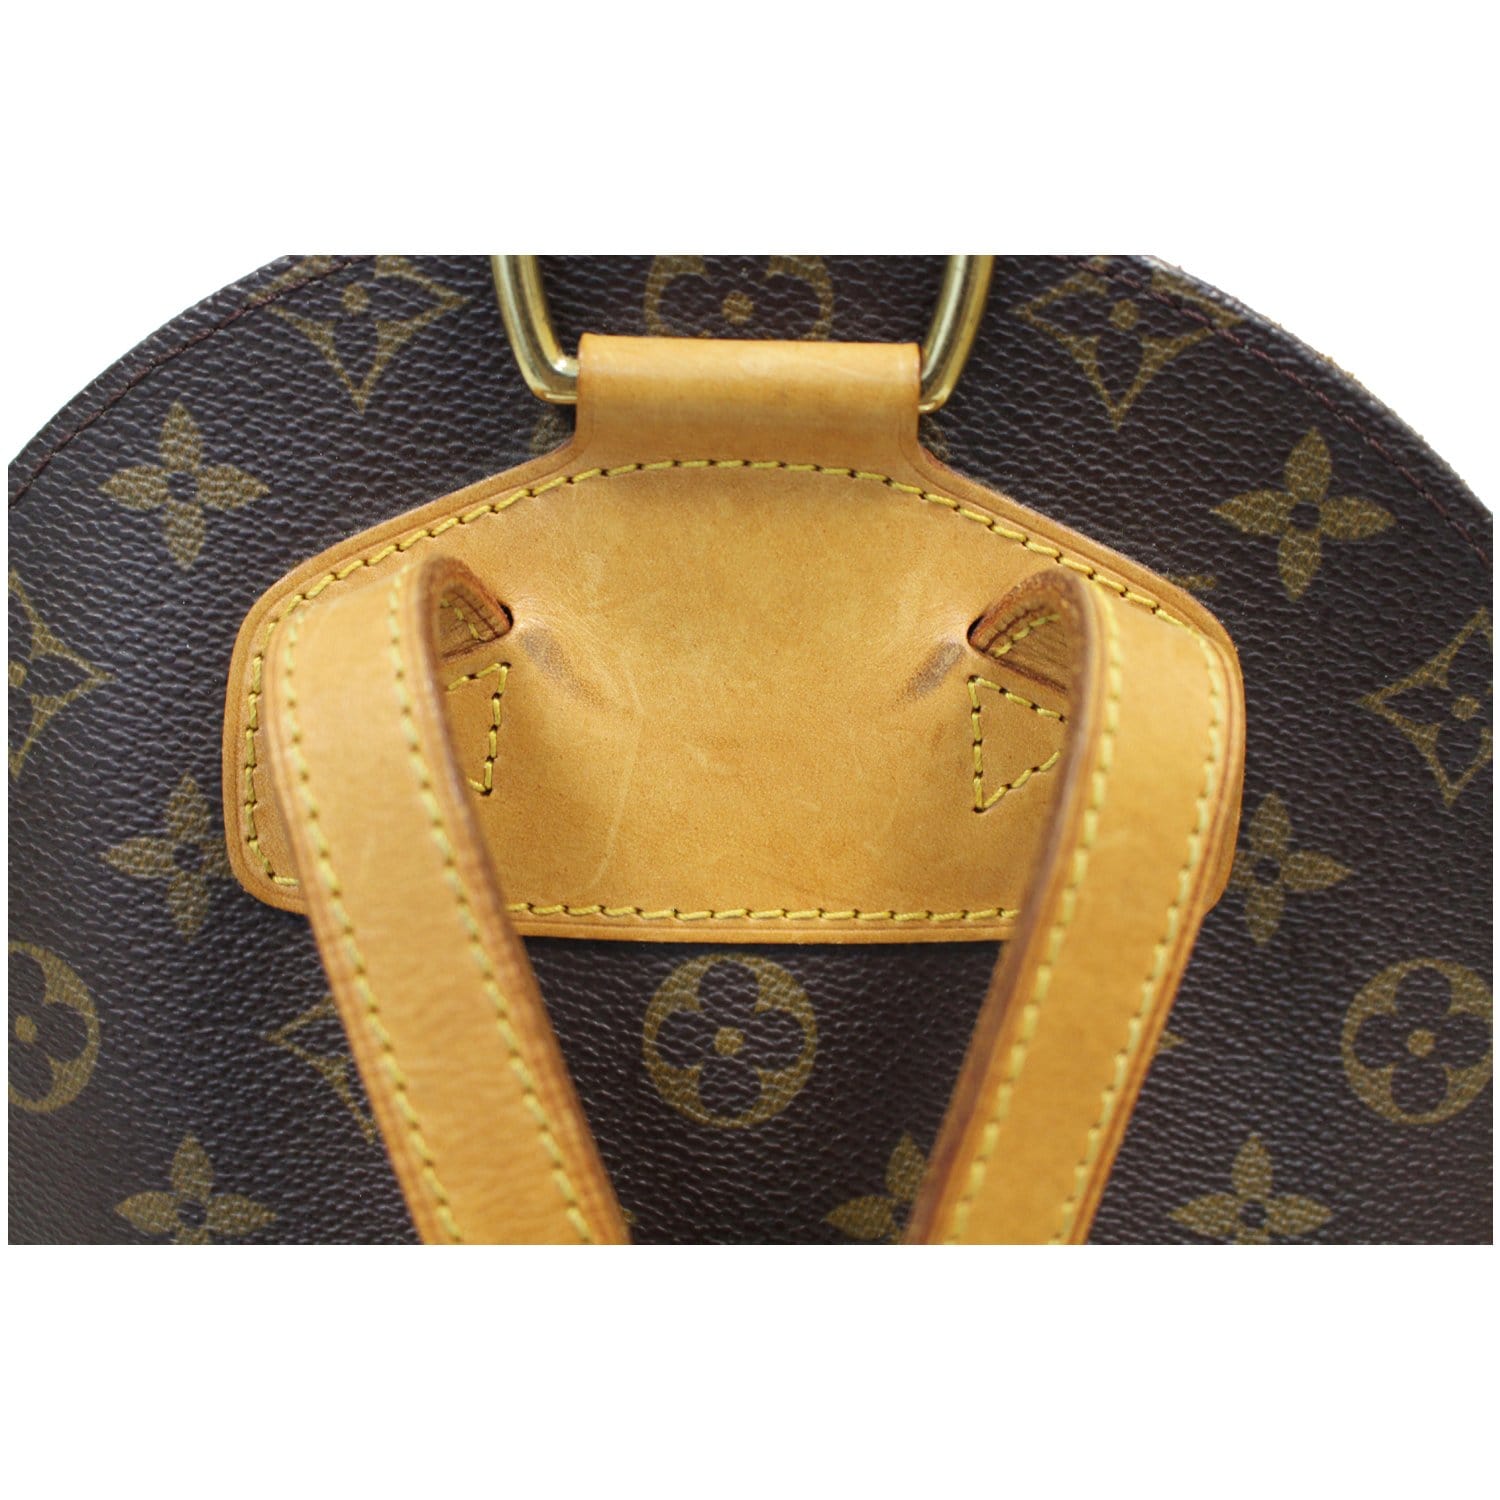 LOUIS VUITTON Ellipse Sac a Dos Backpack M51125｜Product Code